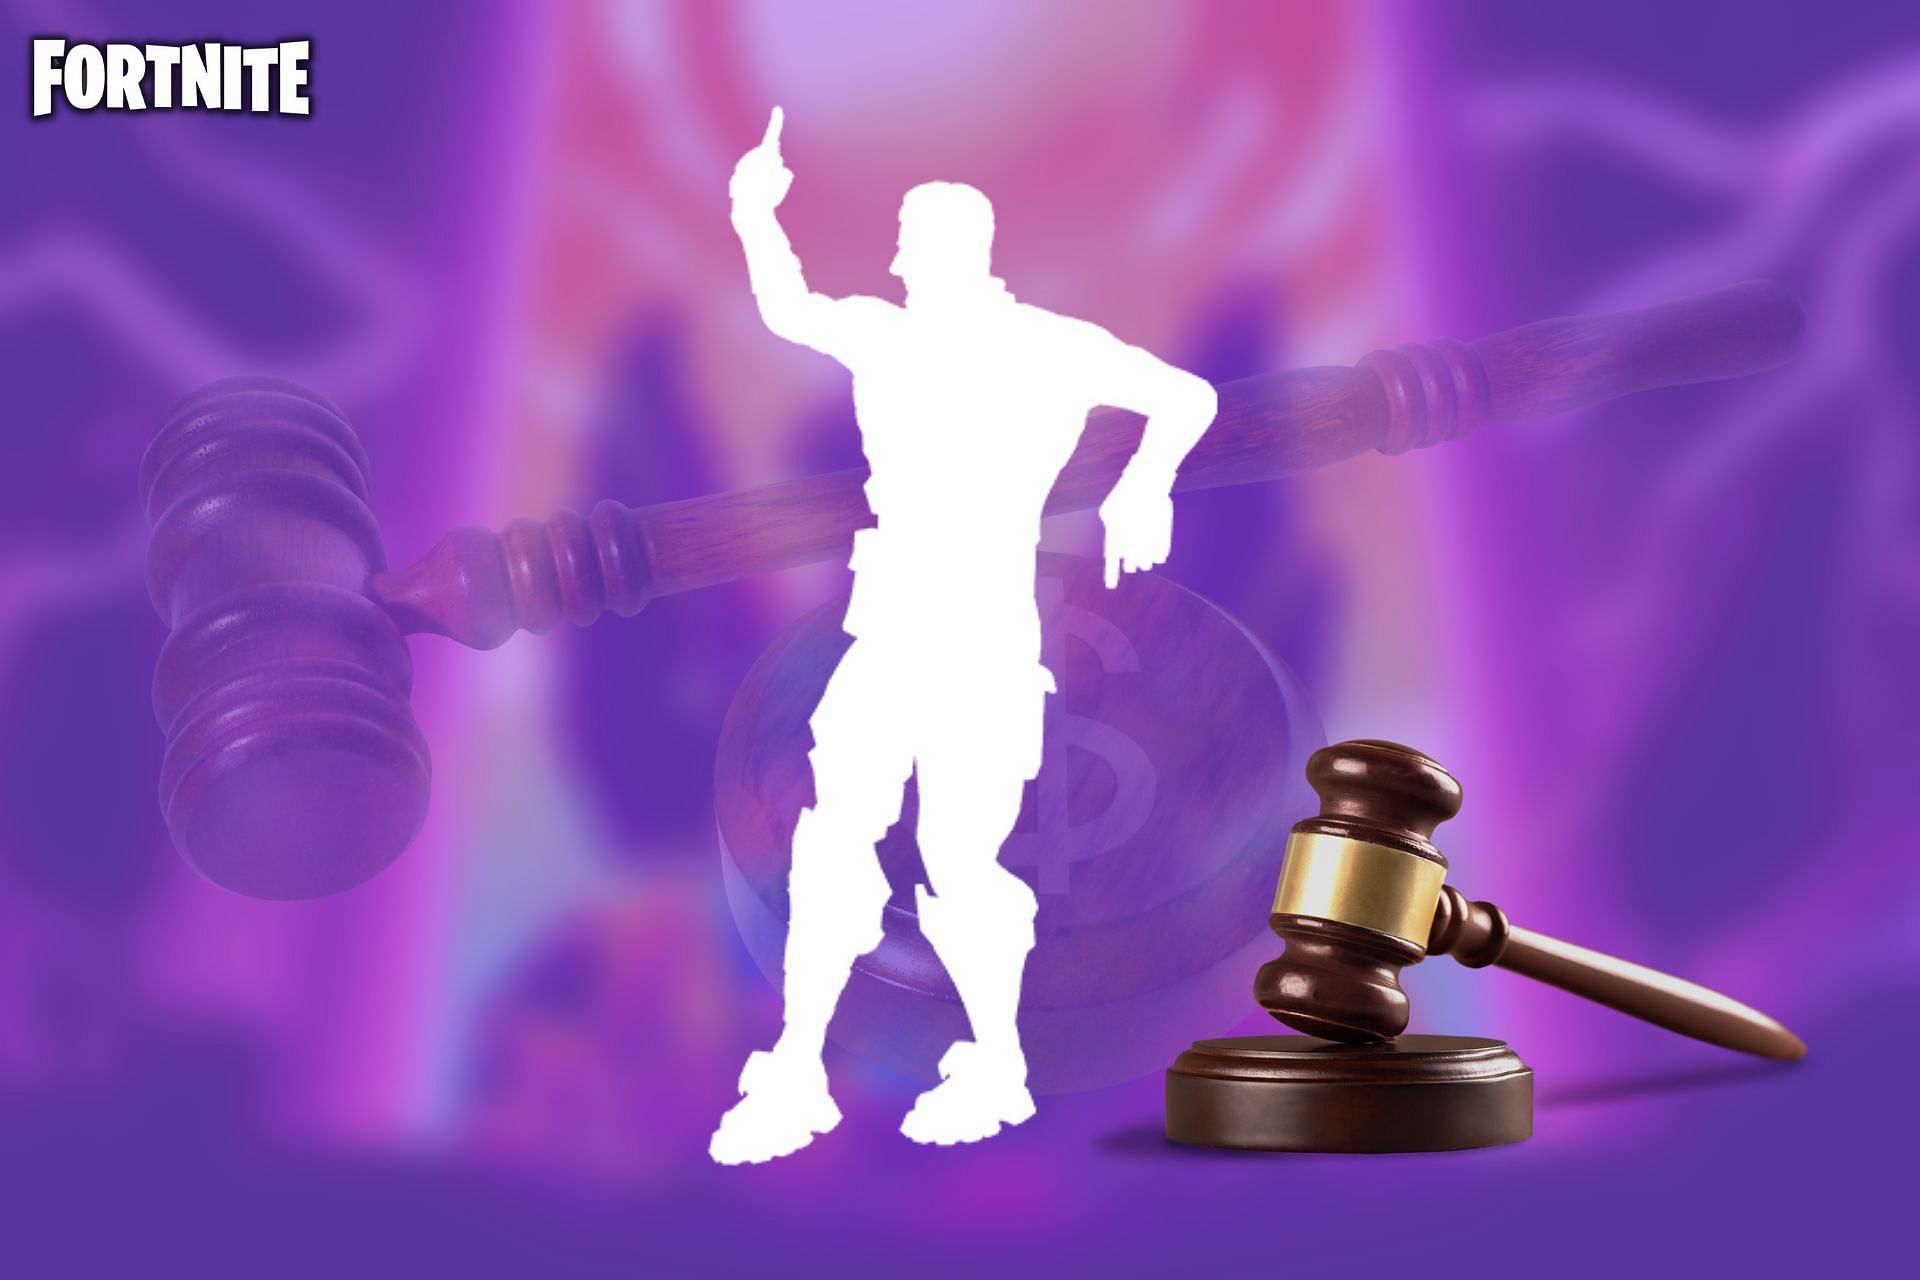 Epic Games has been hit with a brand new lawsuit that&#039;s rather &#039;complicated&#039; in nature (Image via Sportskeeda)